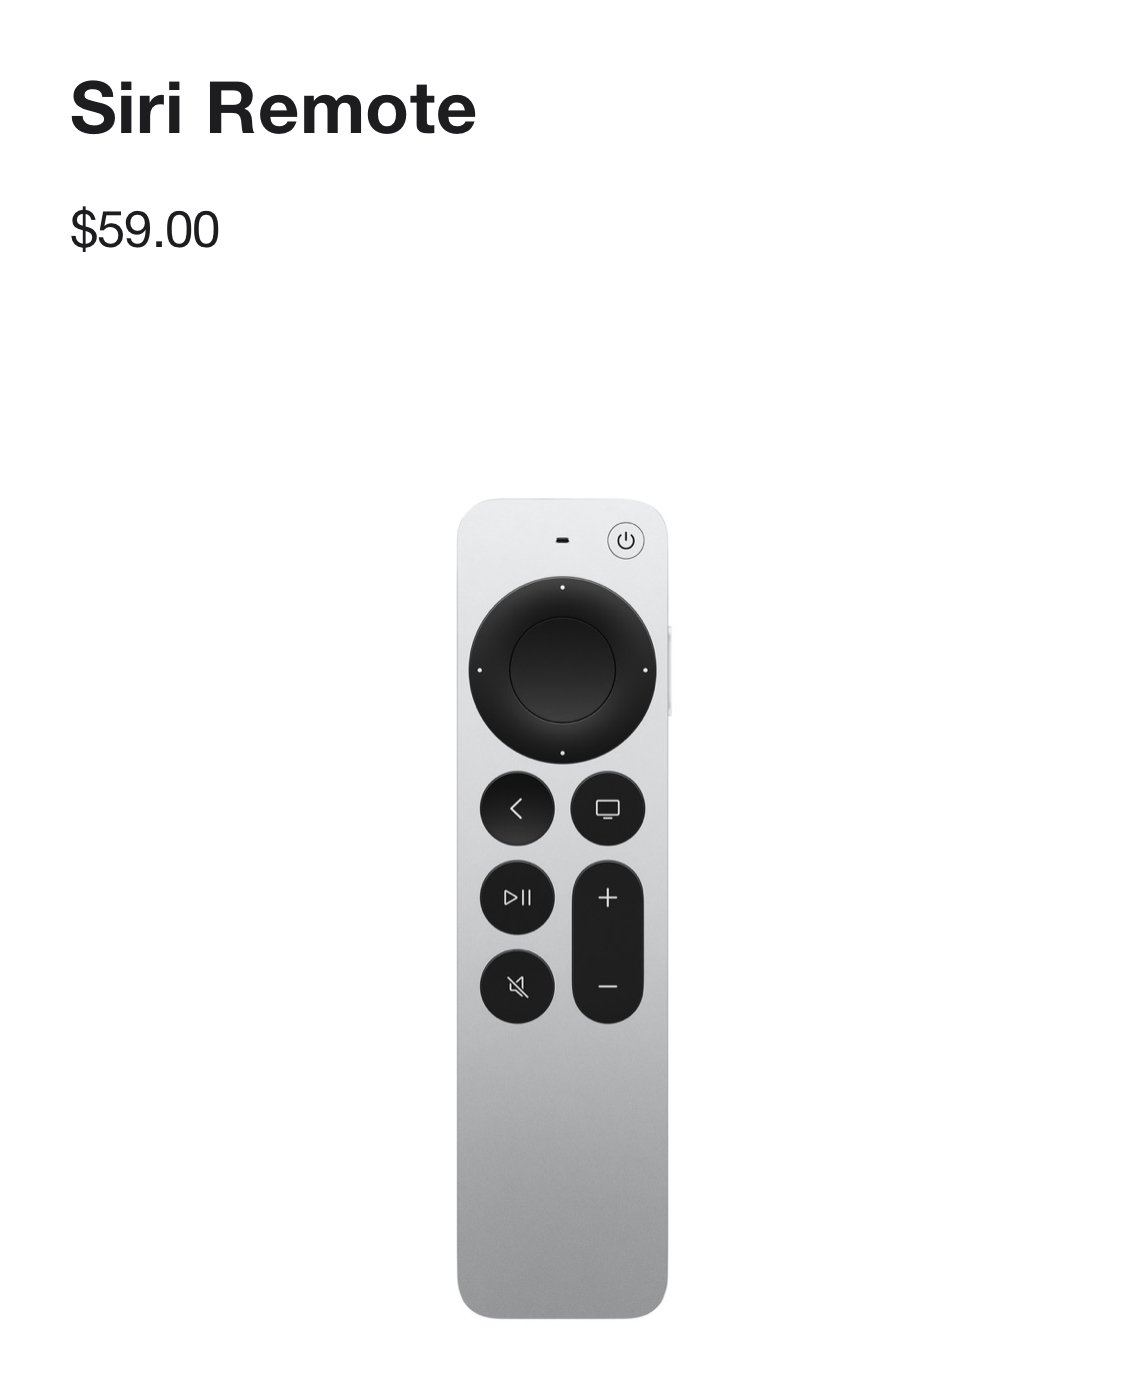 this remote is better than the hot garbage touch panel remote